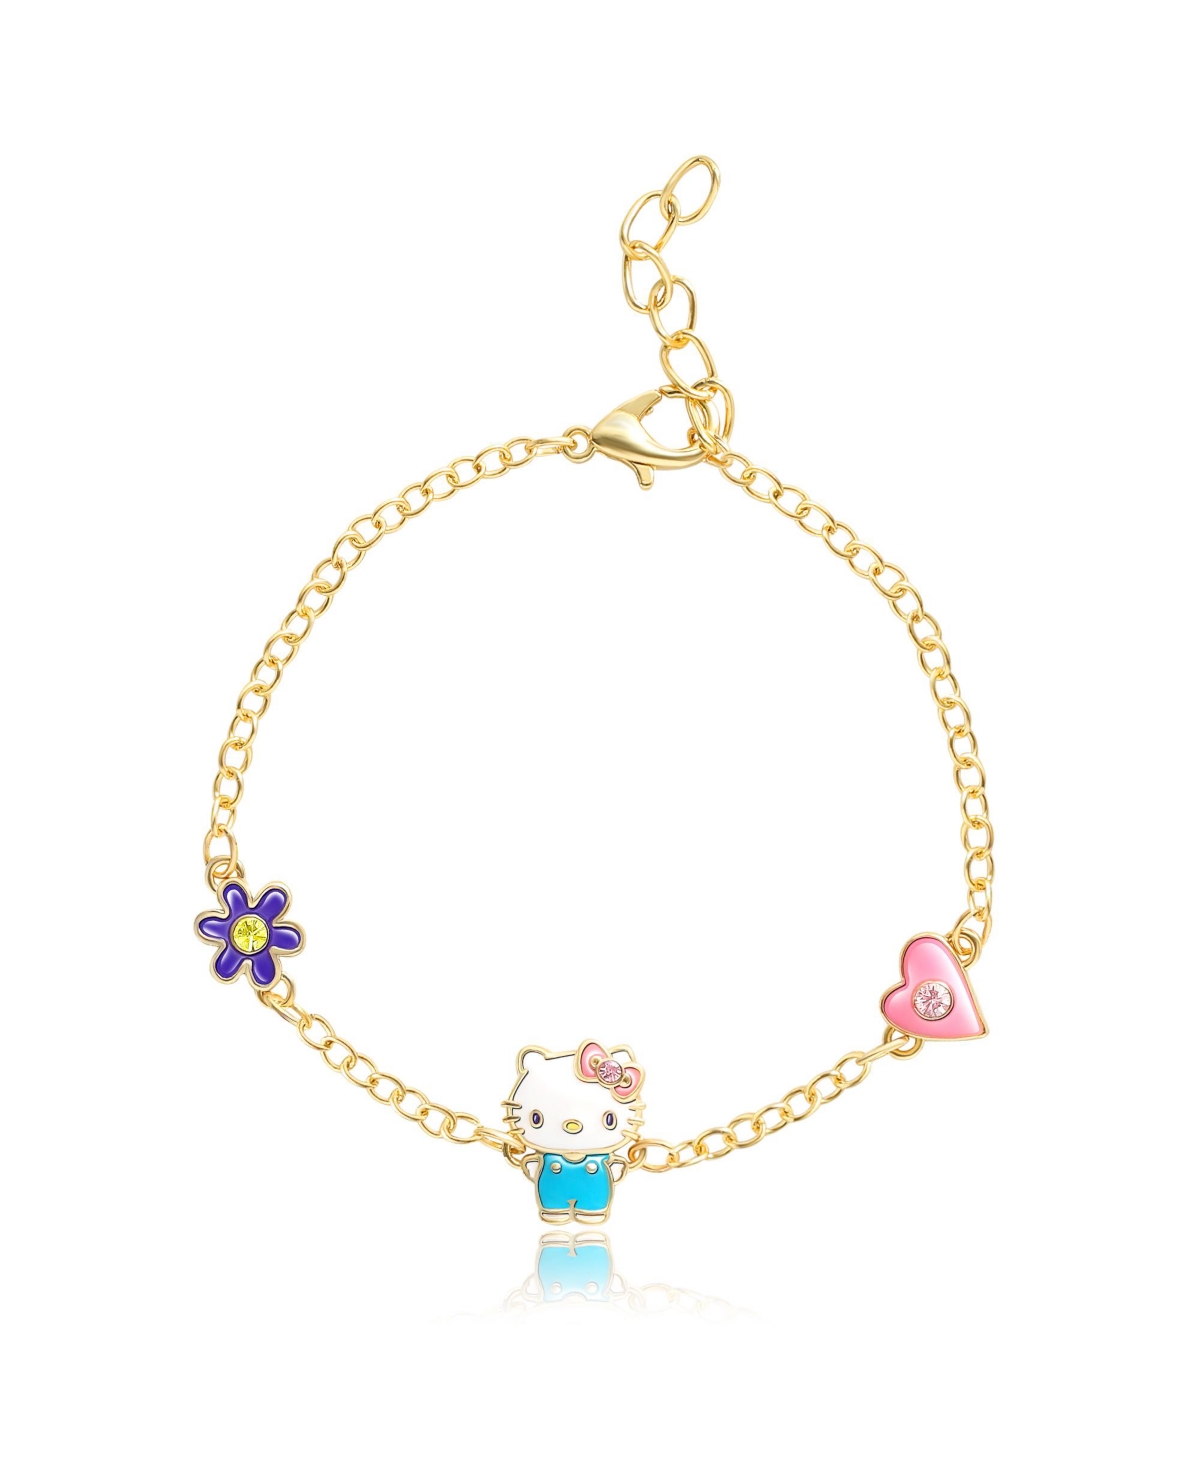 Sanrio Hello Kitty and Friends Womens 18kt Gold Plated Bracelet with Flower and Heart Charm Pendants, 6.5 + 1", Officially Licensed - Gold tone, blue